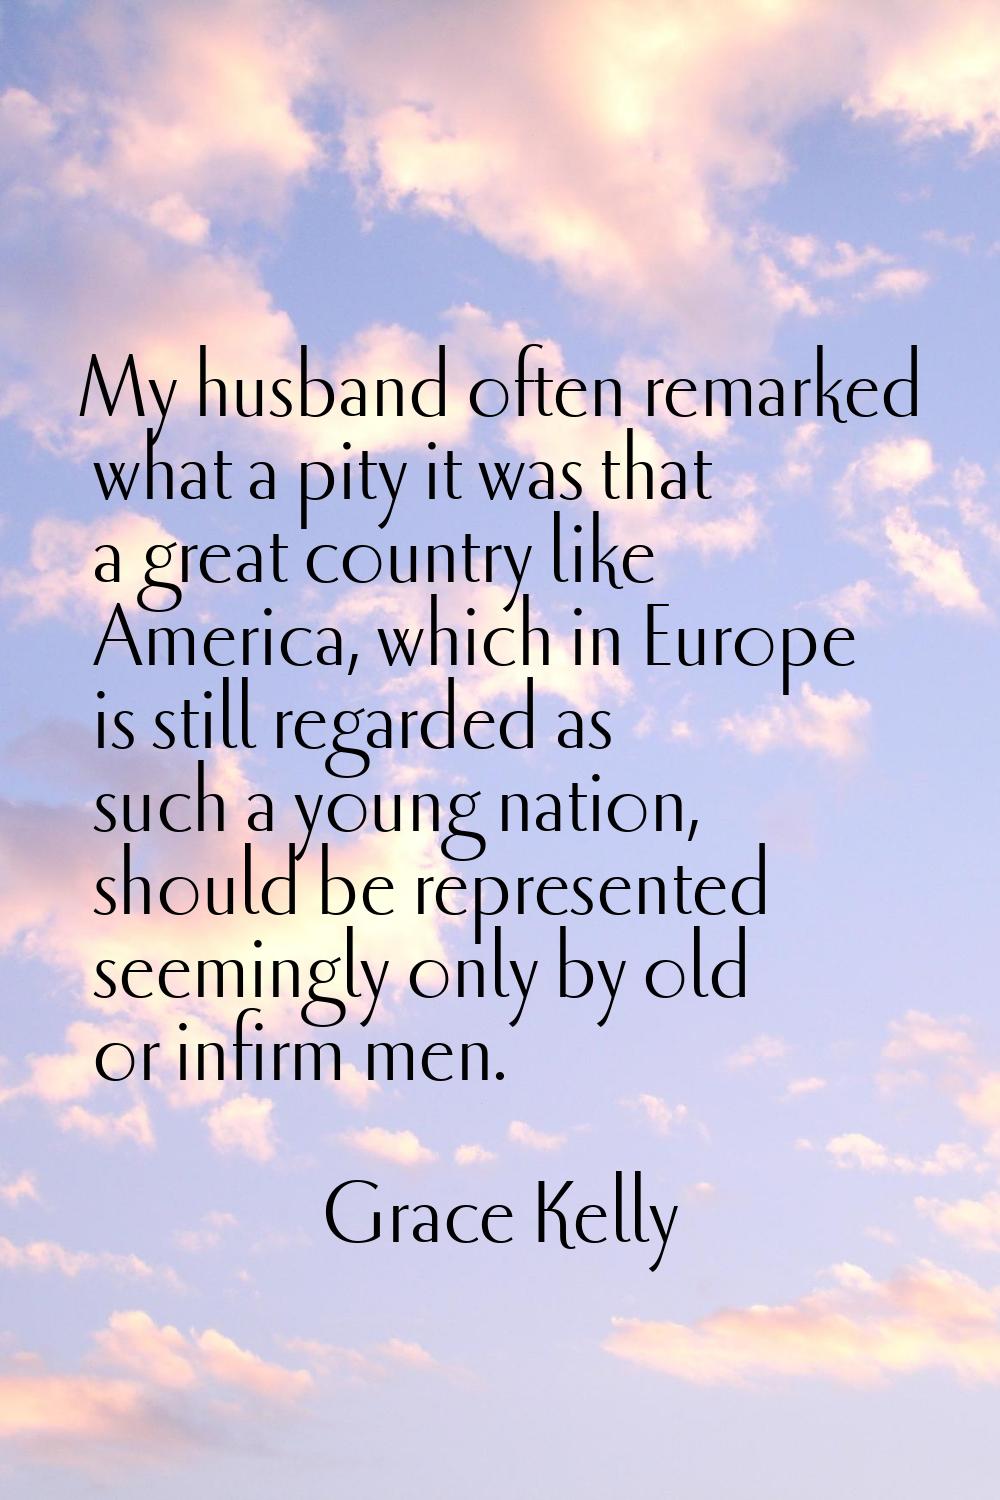 My husband often remarked what a pity it was that a great country like America, which in Europe is 